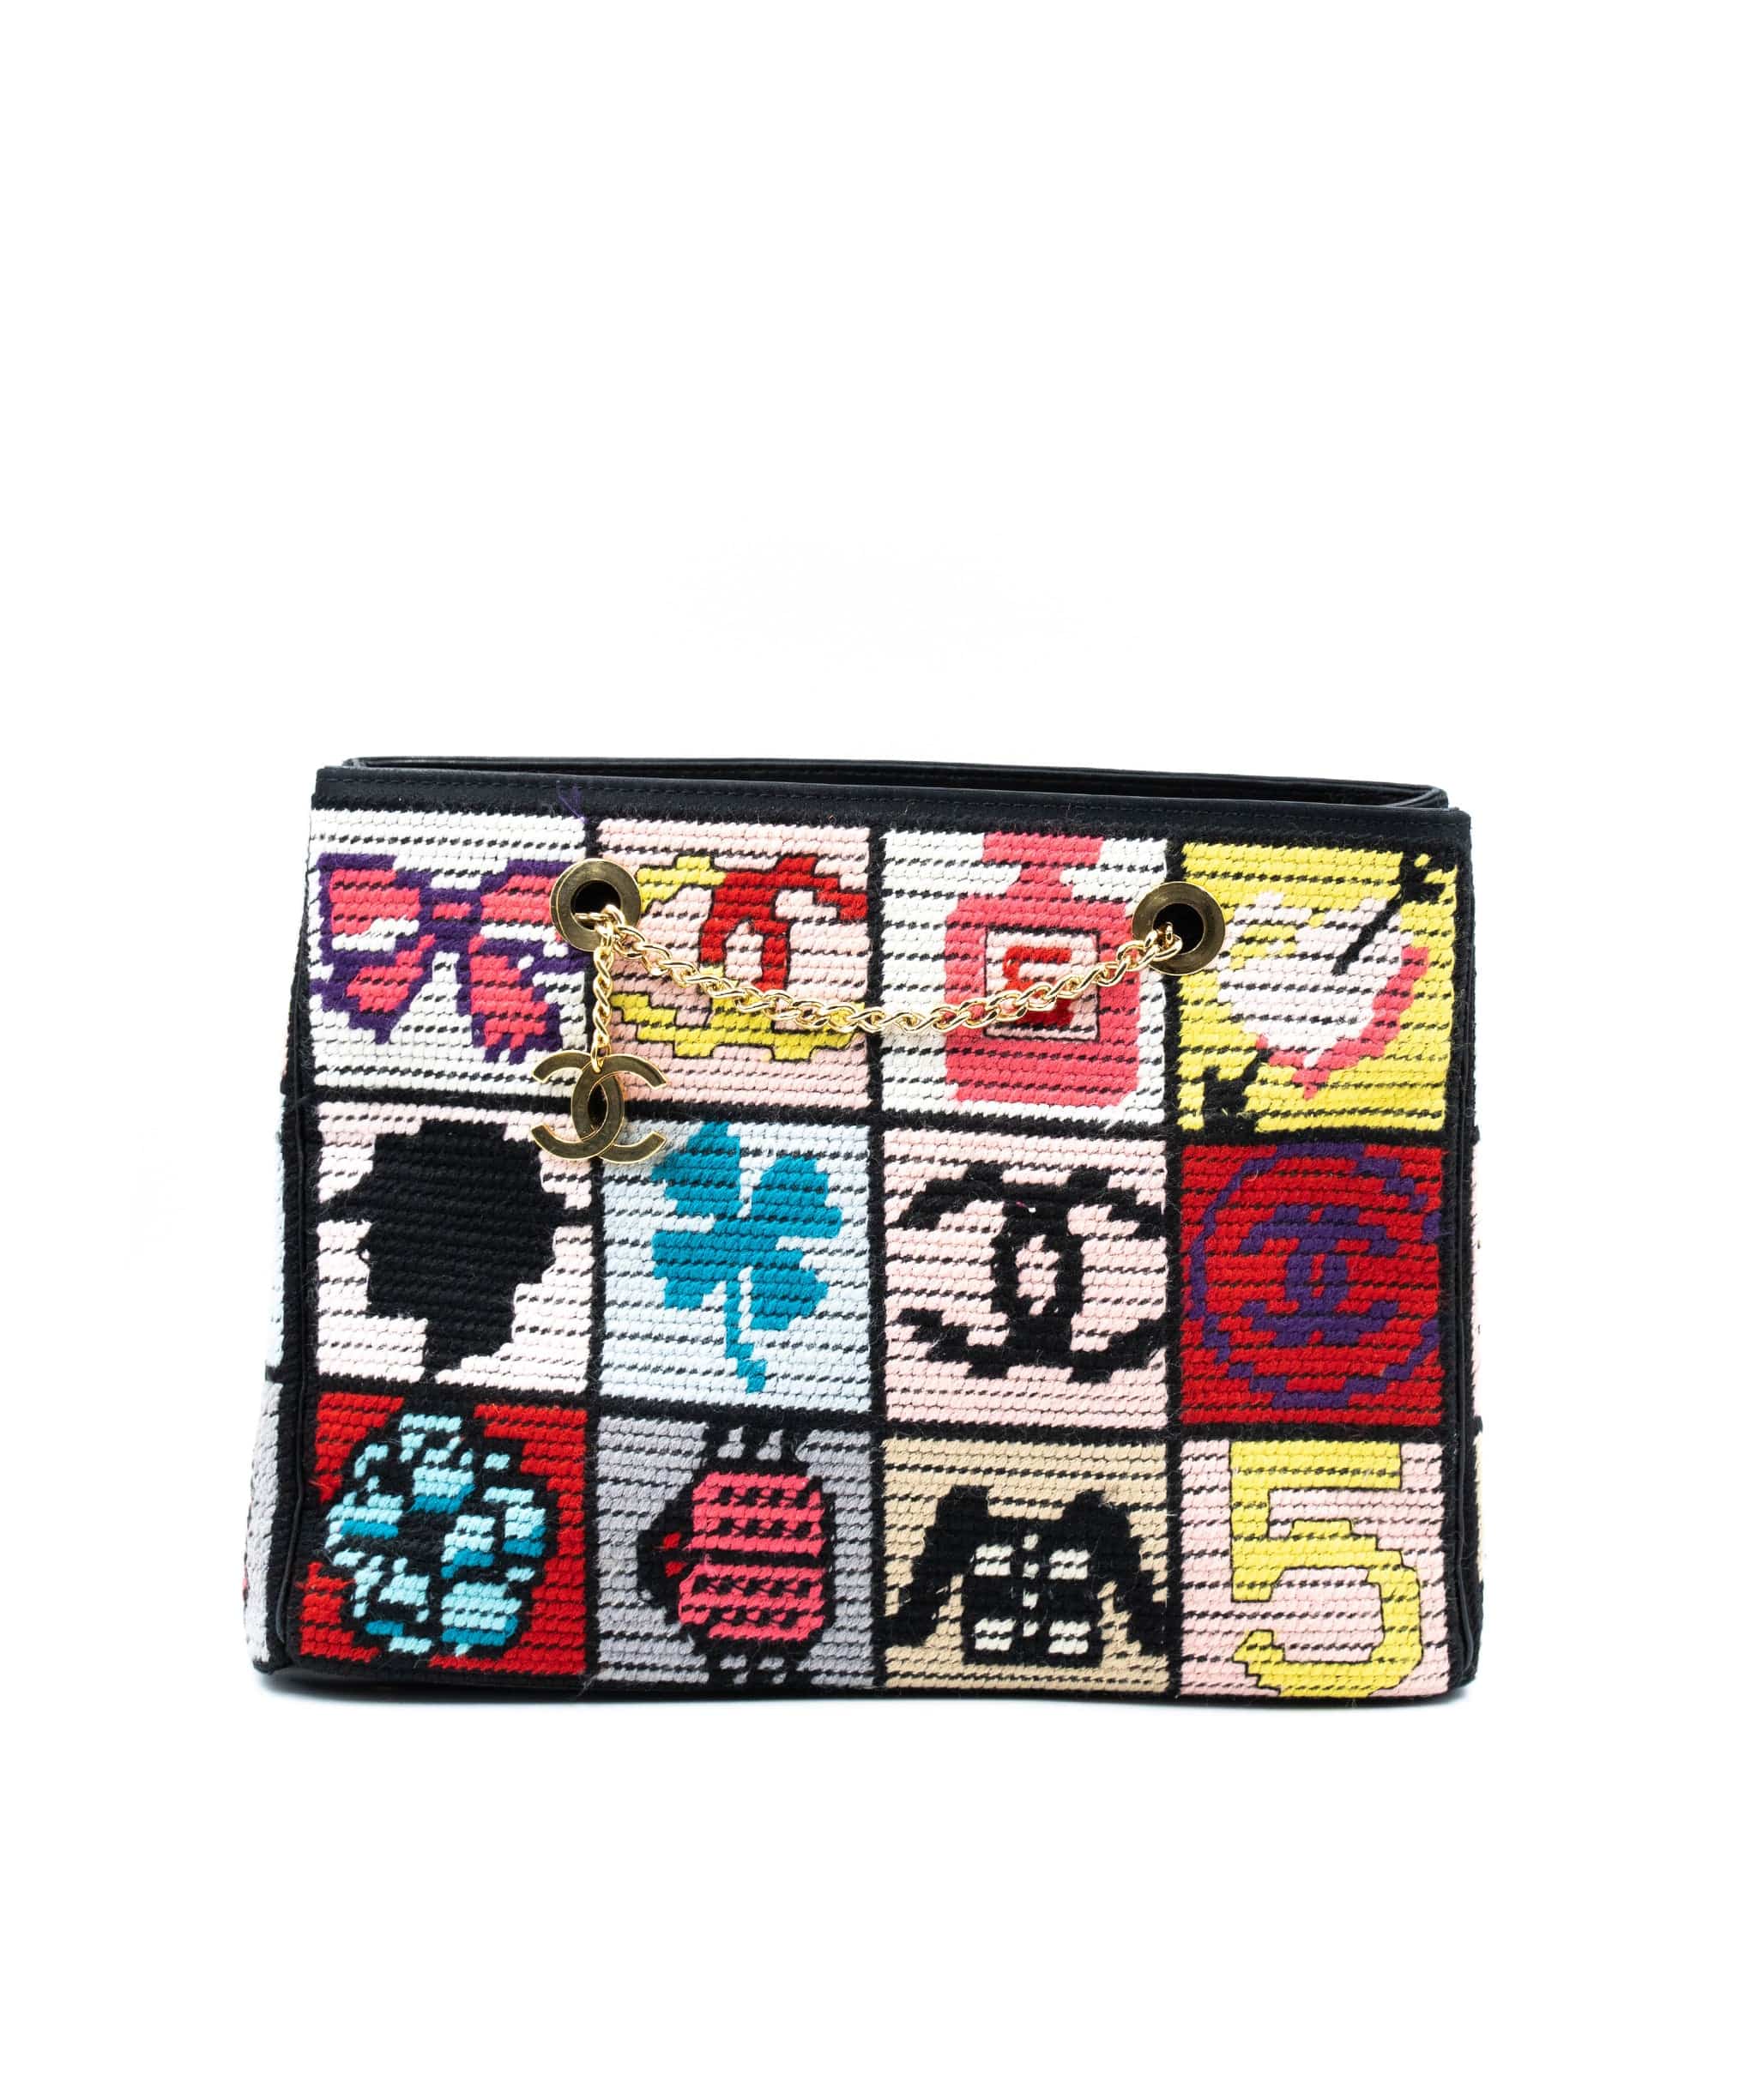 Chanel Chanel Patchwork Needle Point Stitch Bag  AGC1148